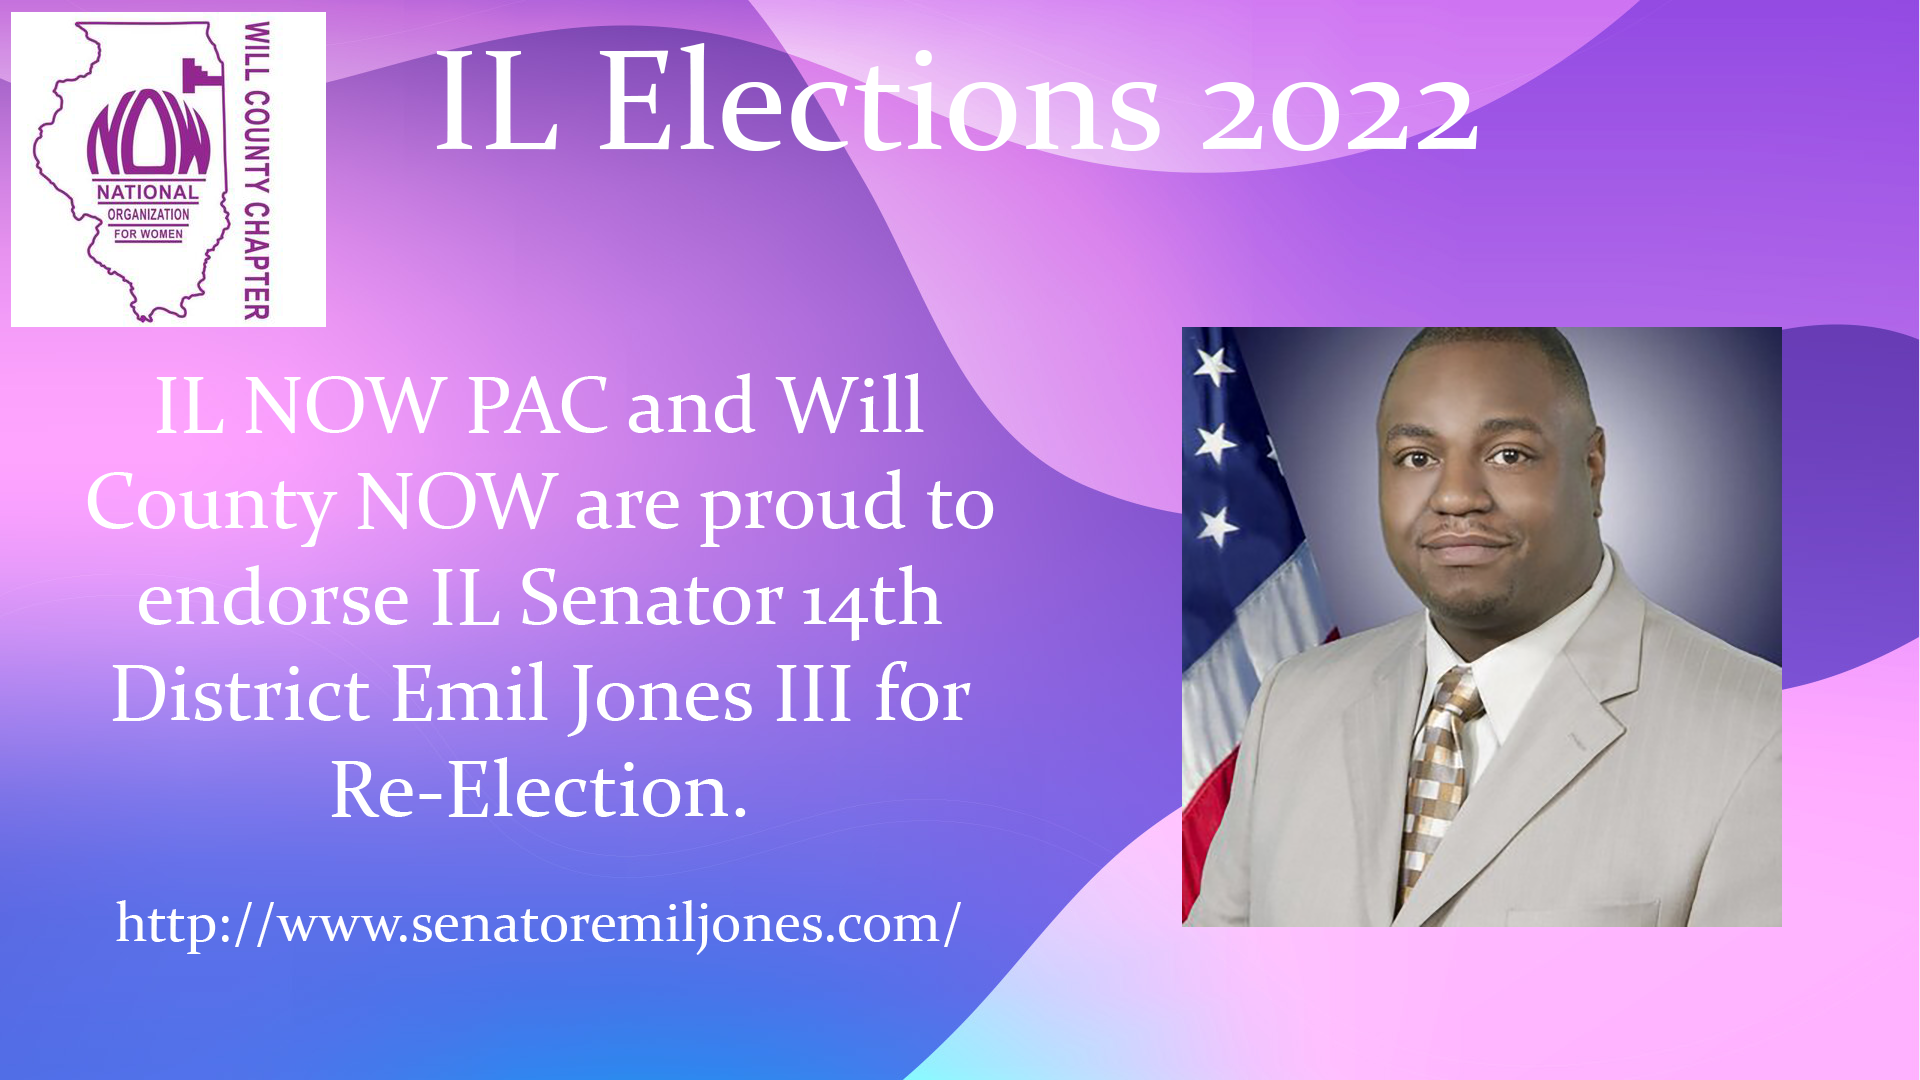 Will County NOW Endorses IL Senator 14th District Emil Jones III for Re-Election